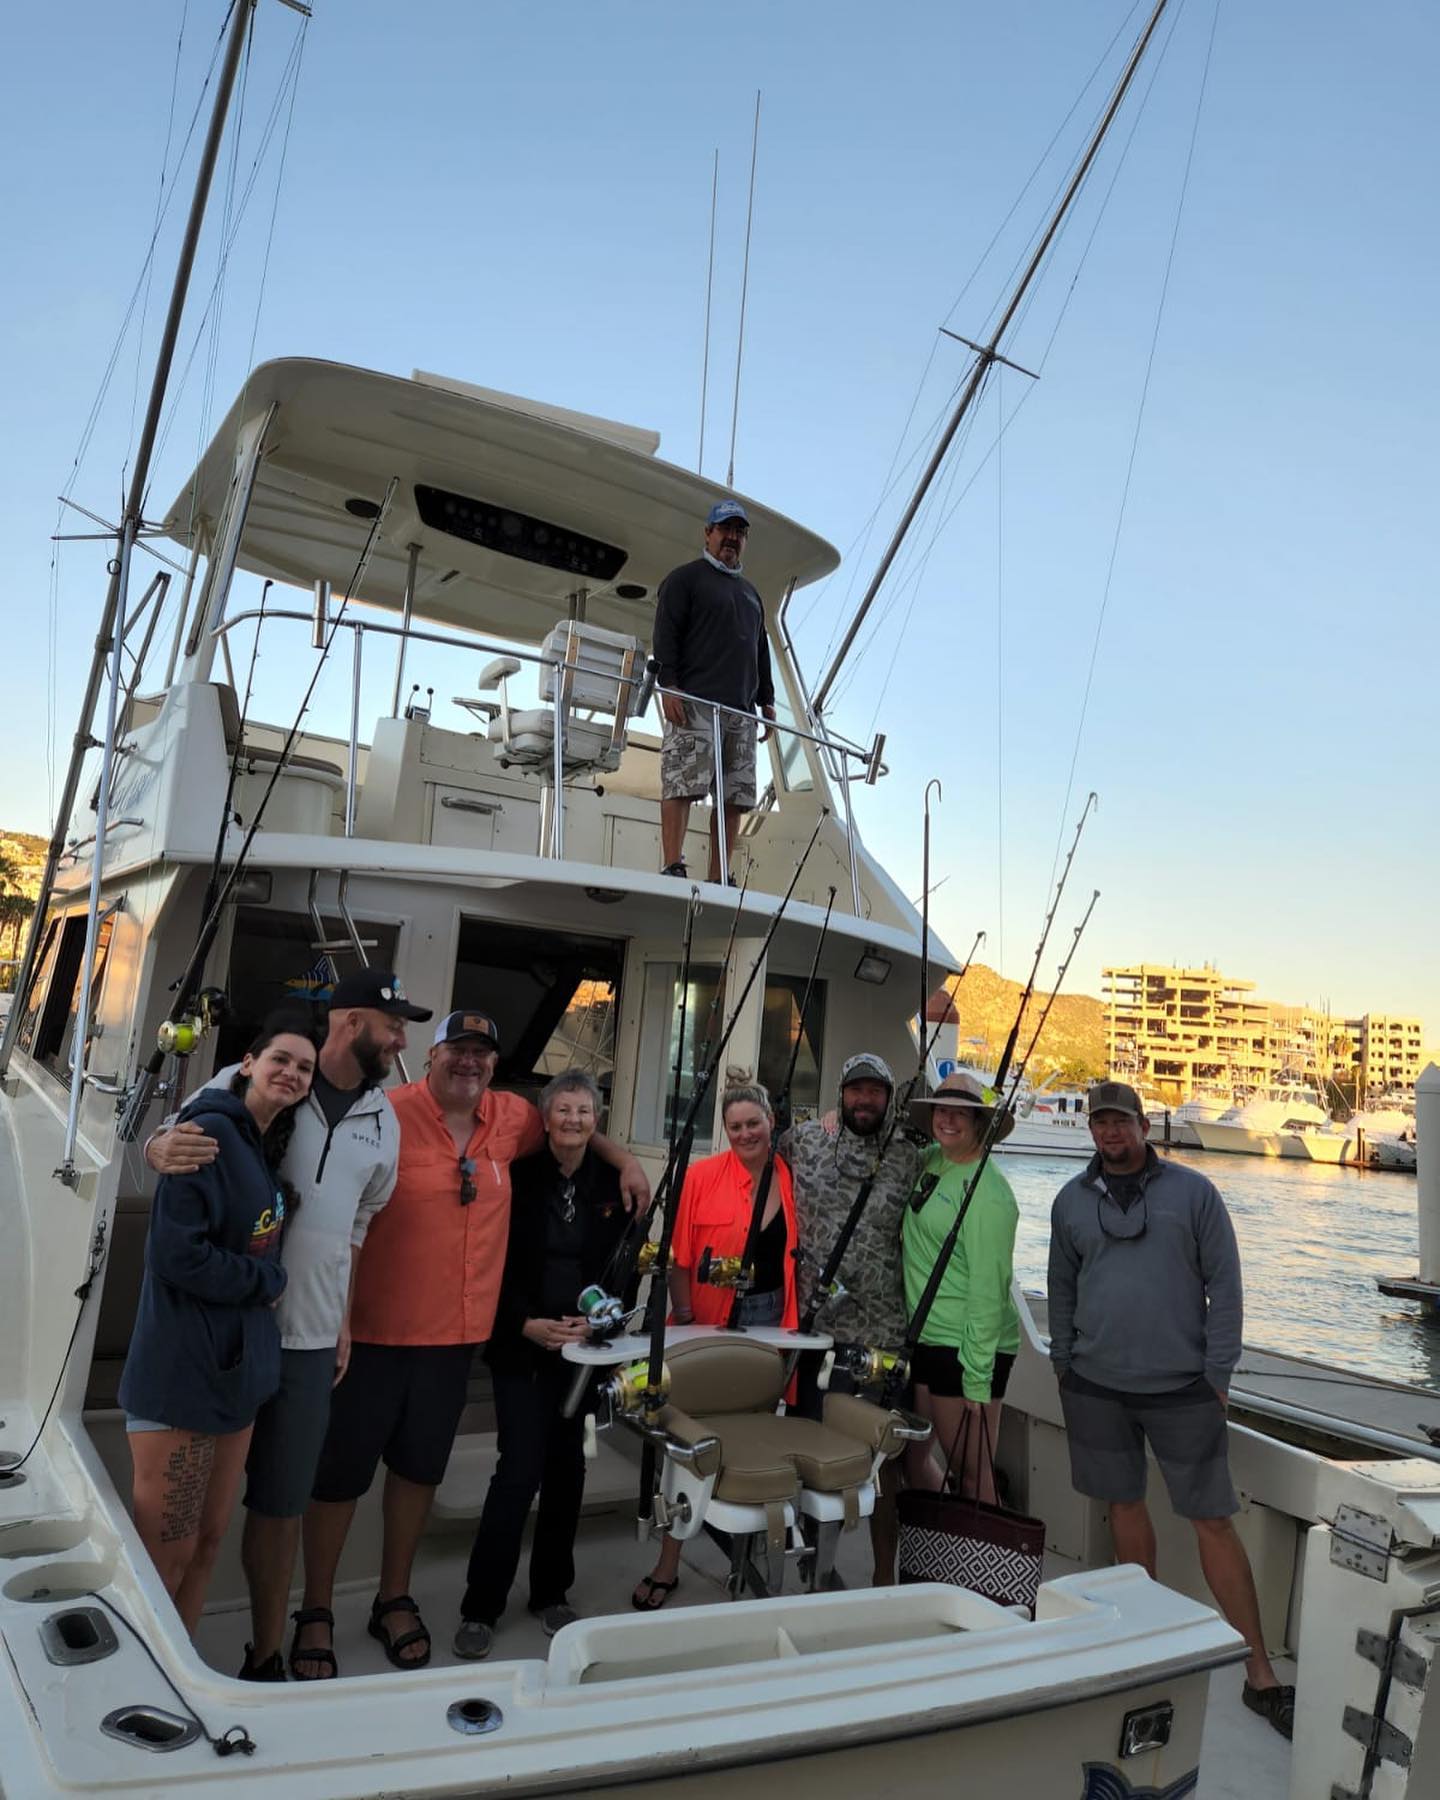 October 30 2022 VIP Guests visiting from New Braunfels, Texas The Chris Flannigan Group Chris Maegan Mary Greg Klepper Ryan Cape Becky Boyd Jason Veillon Lisa Veillon  44′ Hatteras UPDATE at 9:30am they have already released 2 Marlin and are in a TRIPLE HOOKUP now